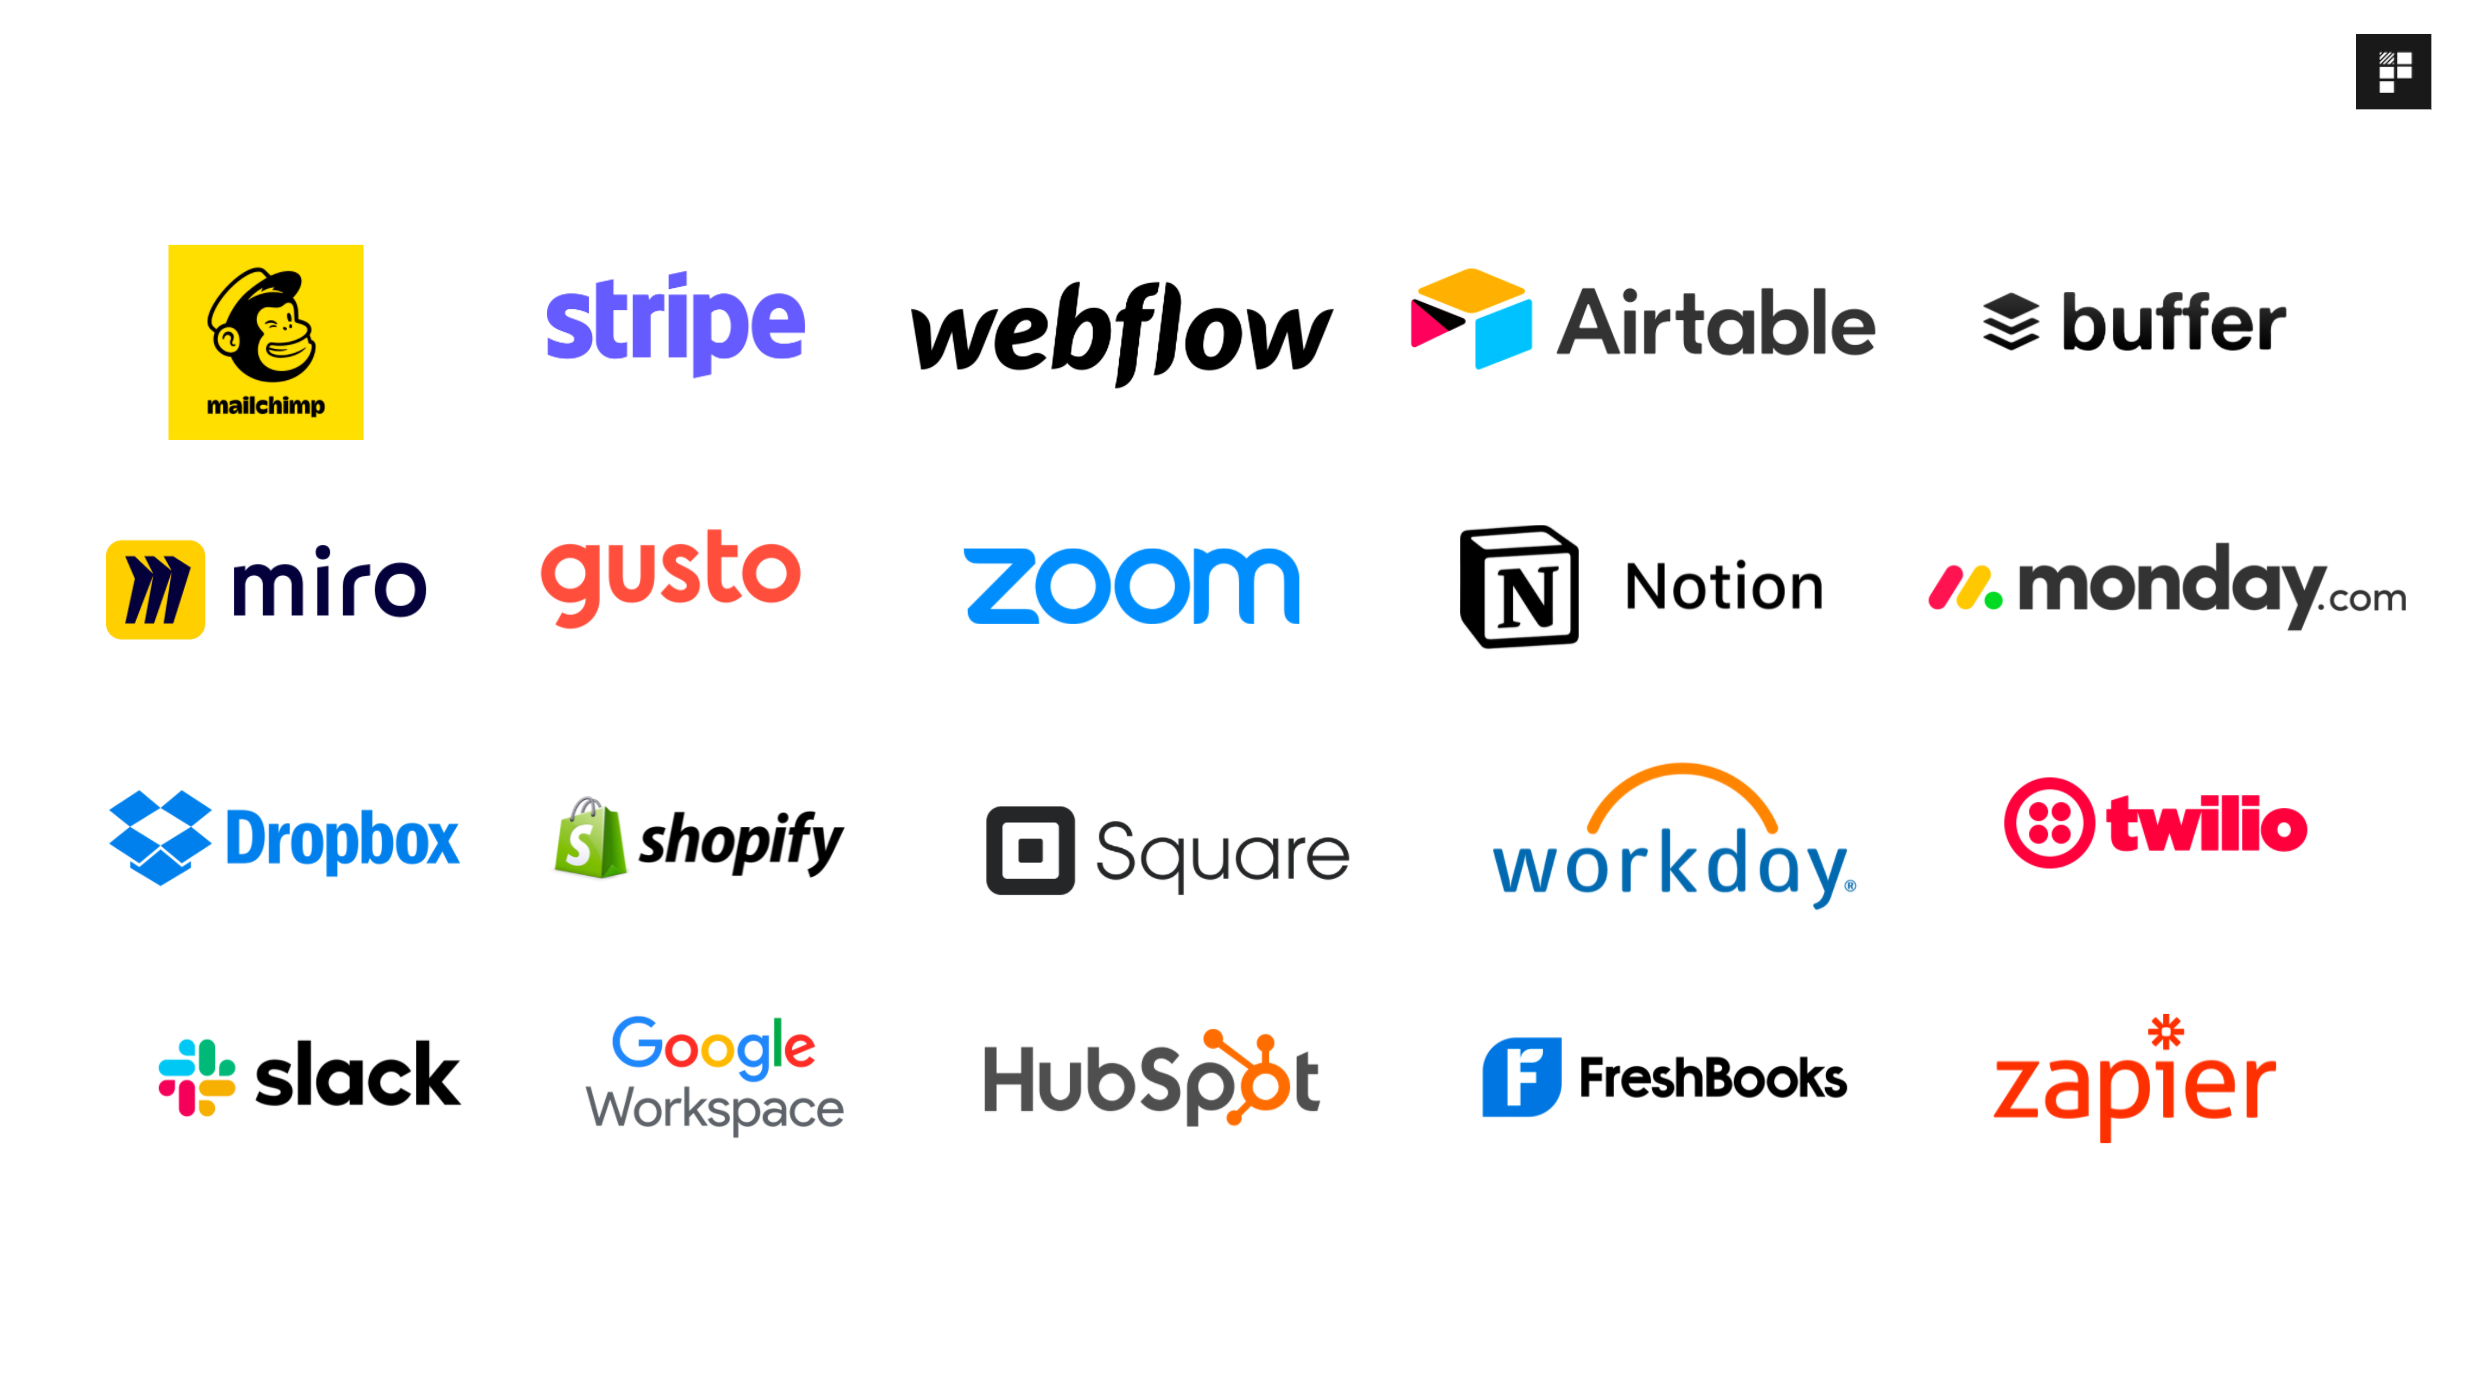 SaaS companies profiled for pricing models